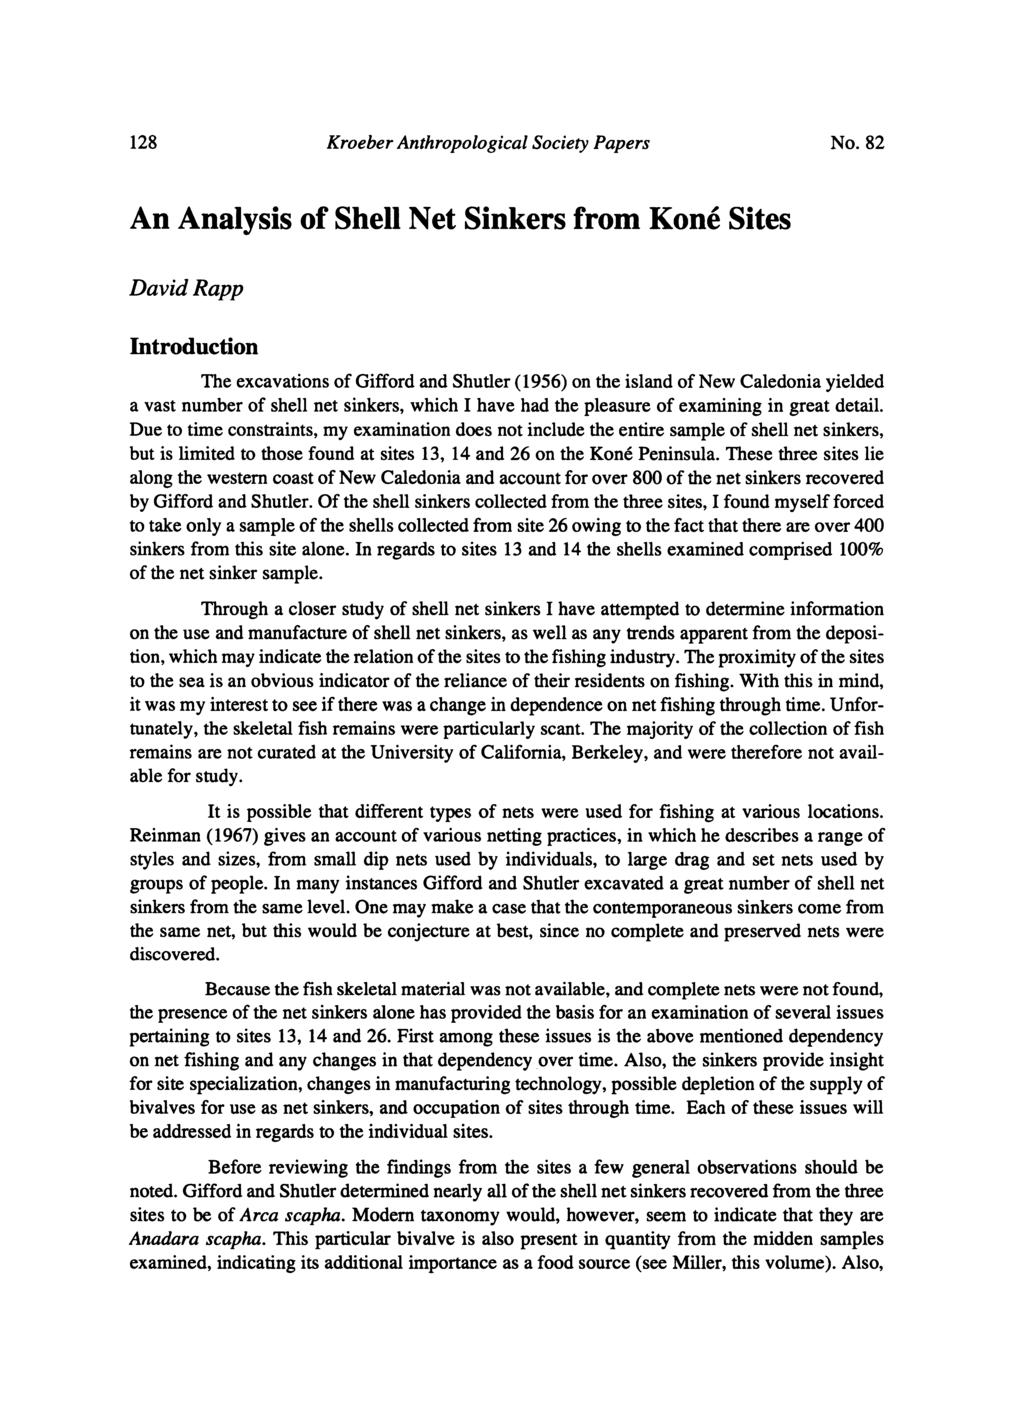 128 Kroeber Anthropological Society Papers An Analysis of Shell Net Sinkers from Kone Sites David Rapp Introduction The excavations of Gifford and Shutler (1956) on the island of New Caledonia